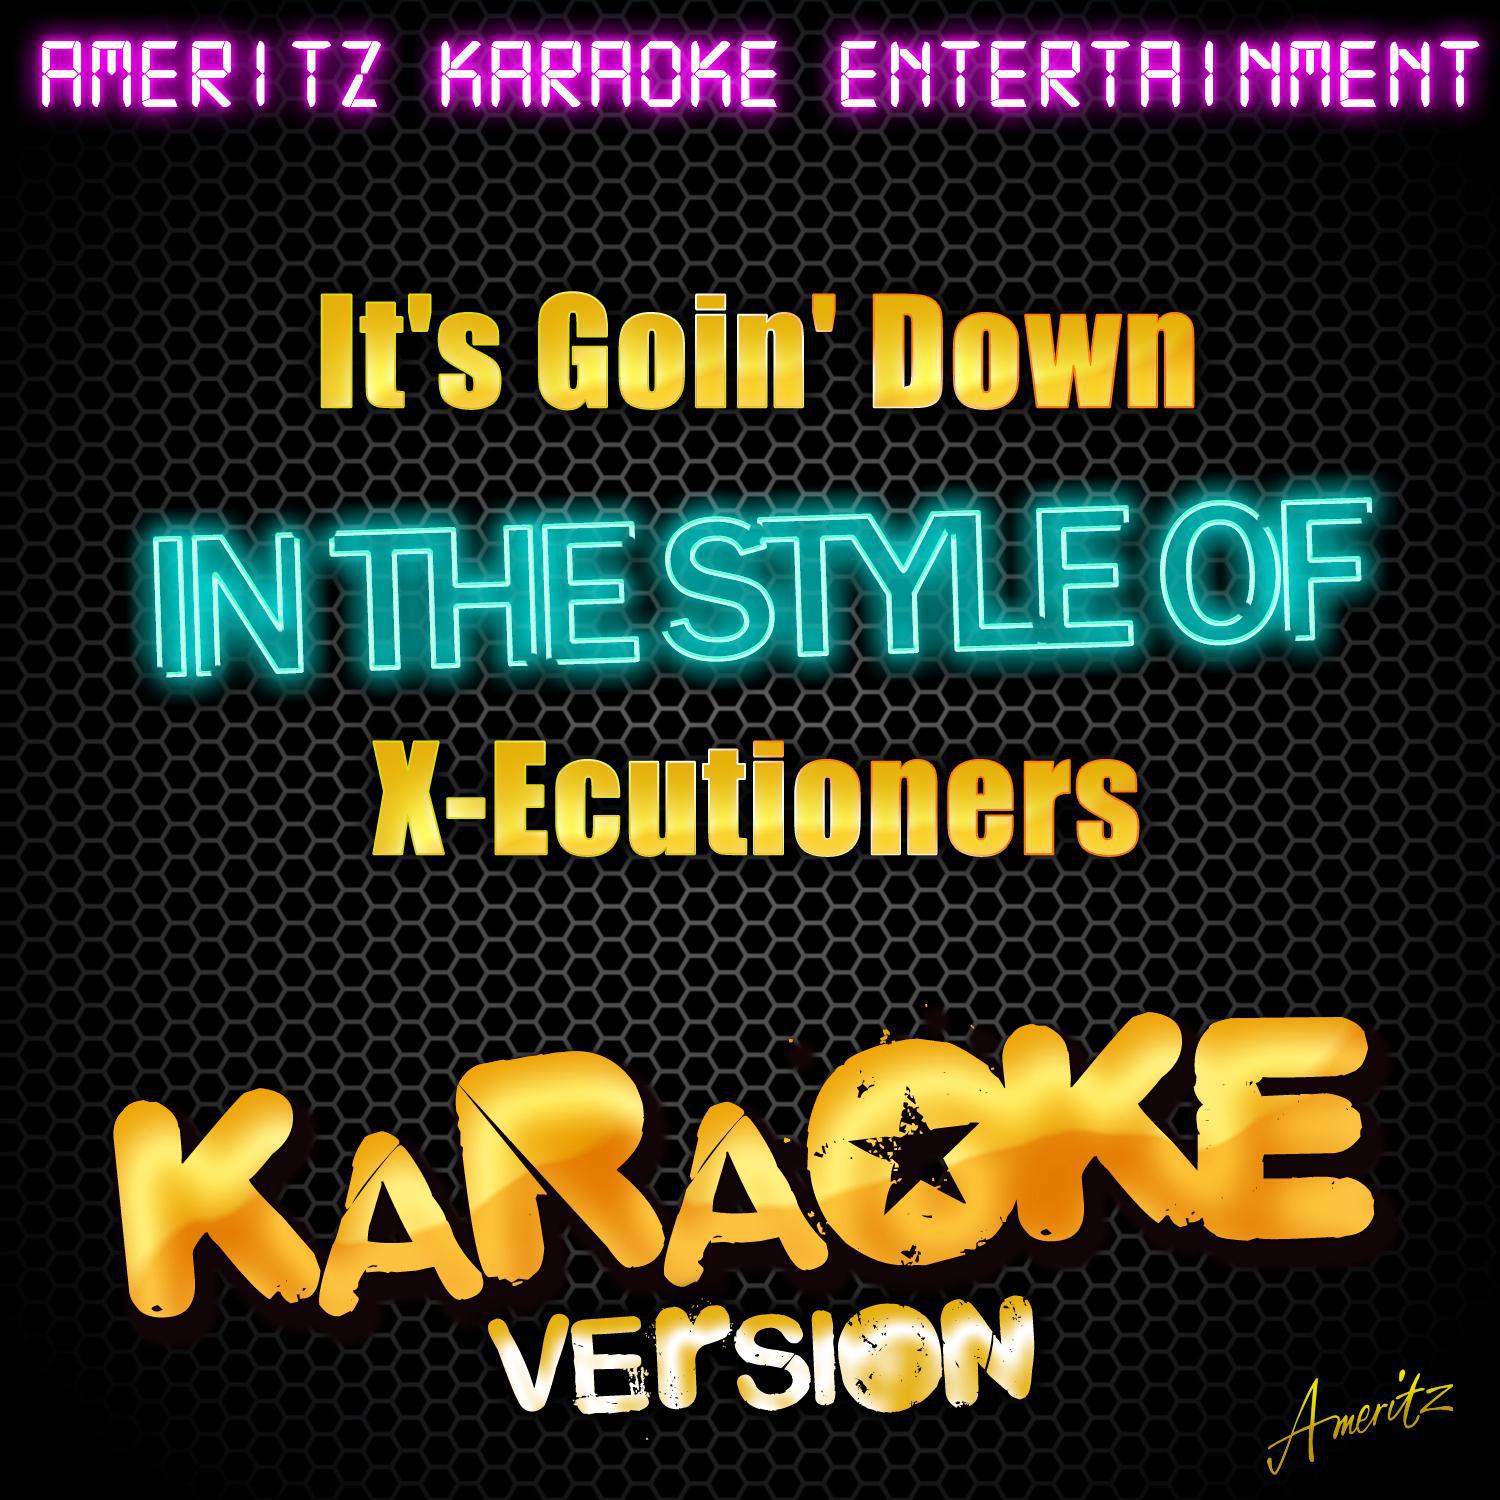 It's Goin' Down (In the Style of X-Ecutioners) [Karaoke Version]